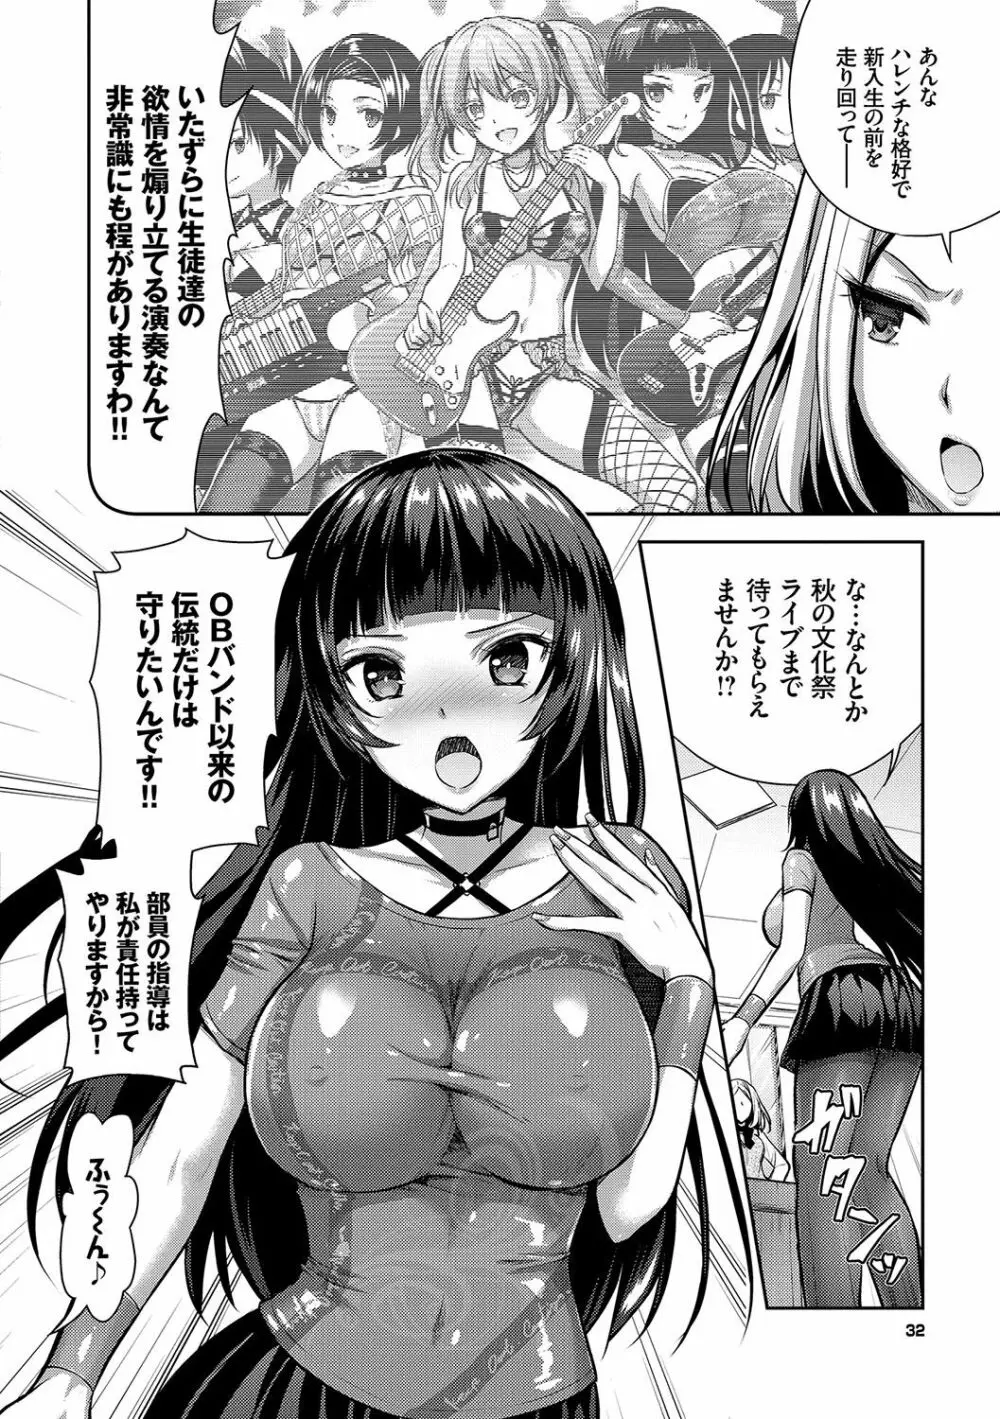 Eat Meat Girl 33ページ